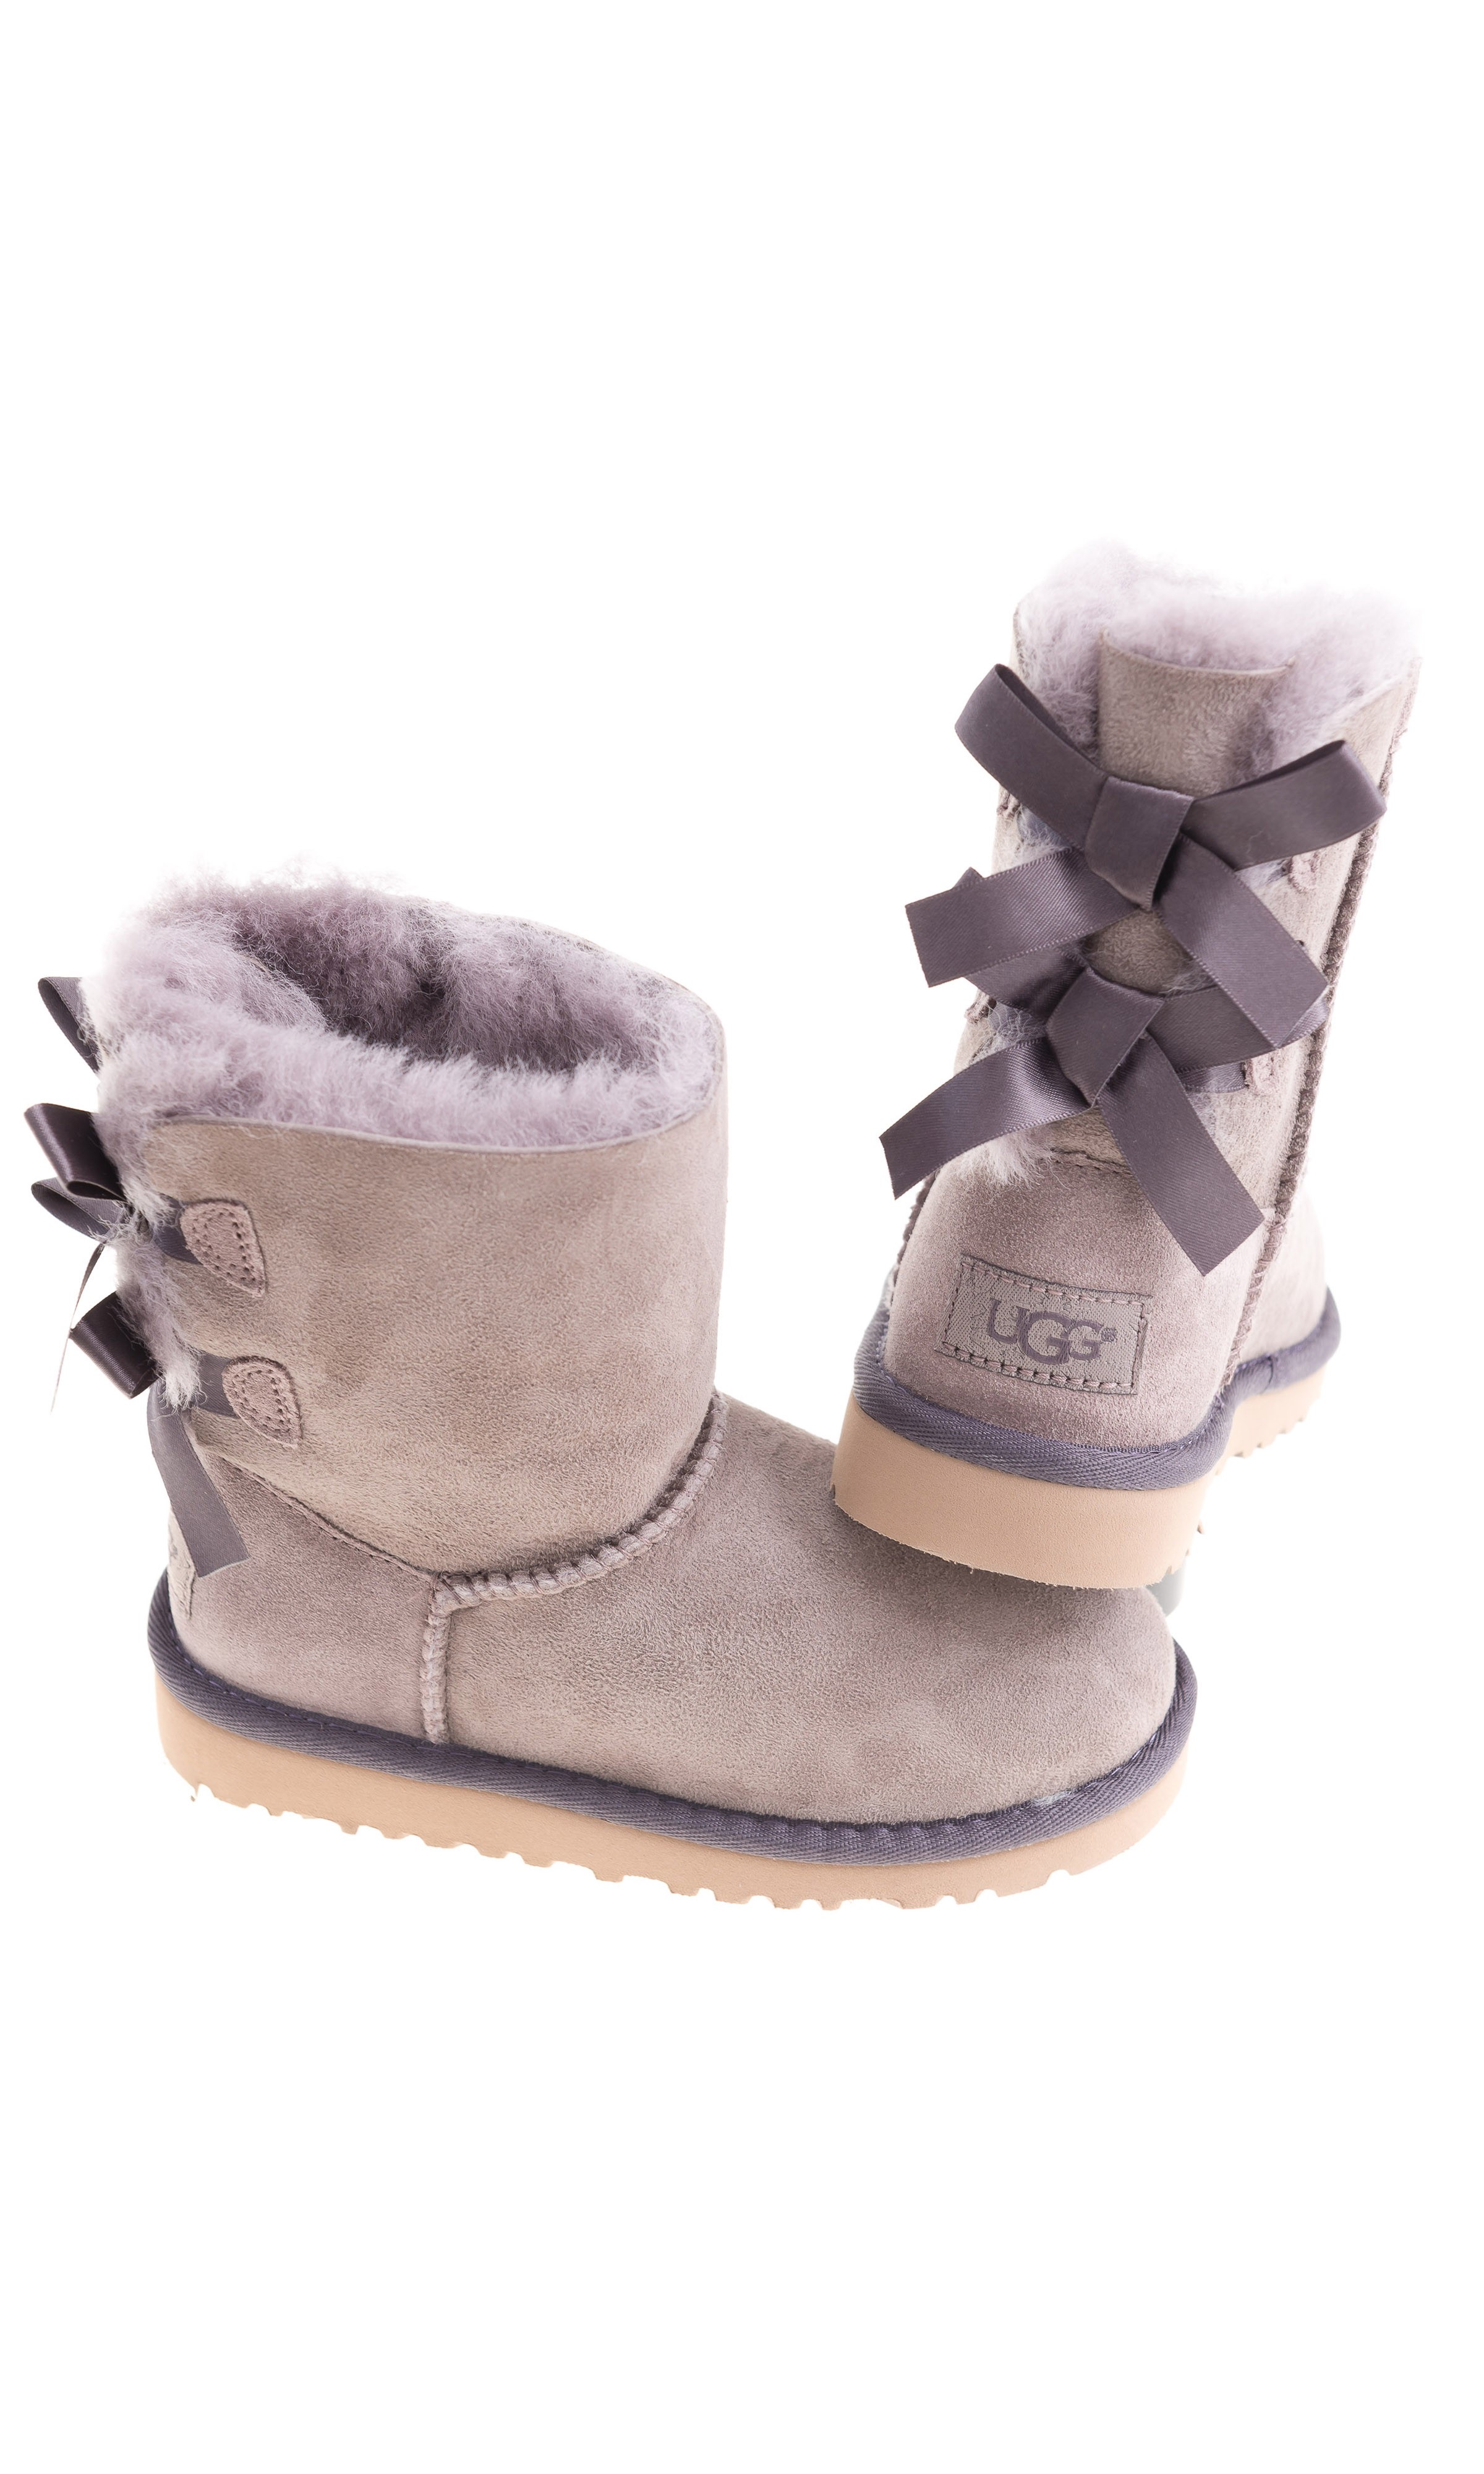 Light brown BAILEY BOW boots, UGG 